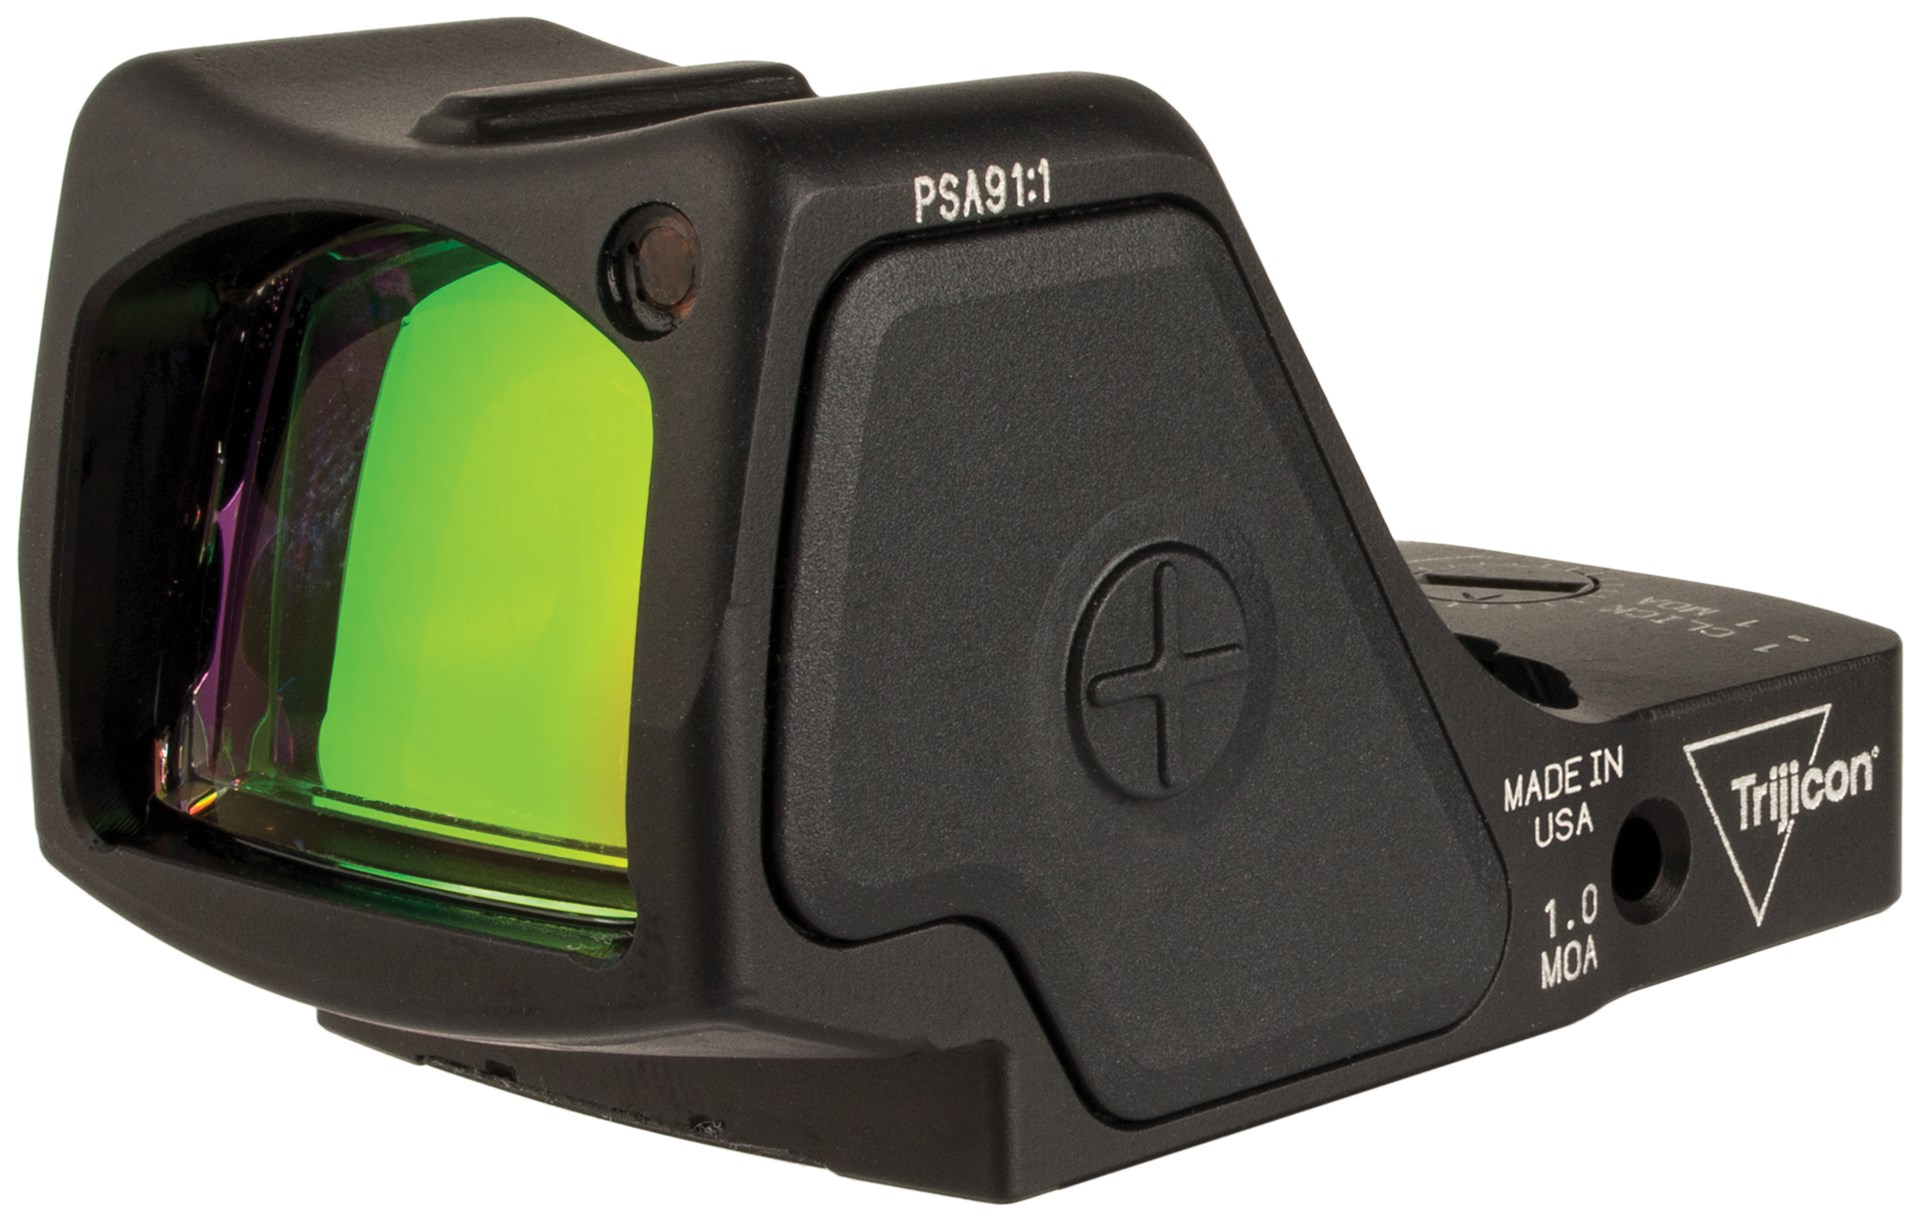 Trijicon RMR HD angled view red-dot reflex optic housing metal black plus button made in usa letters 1.0 MOA